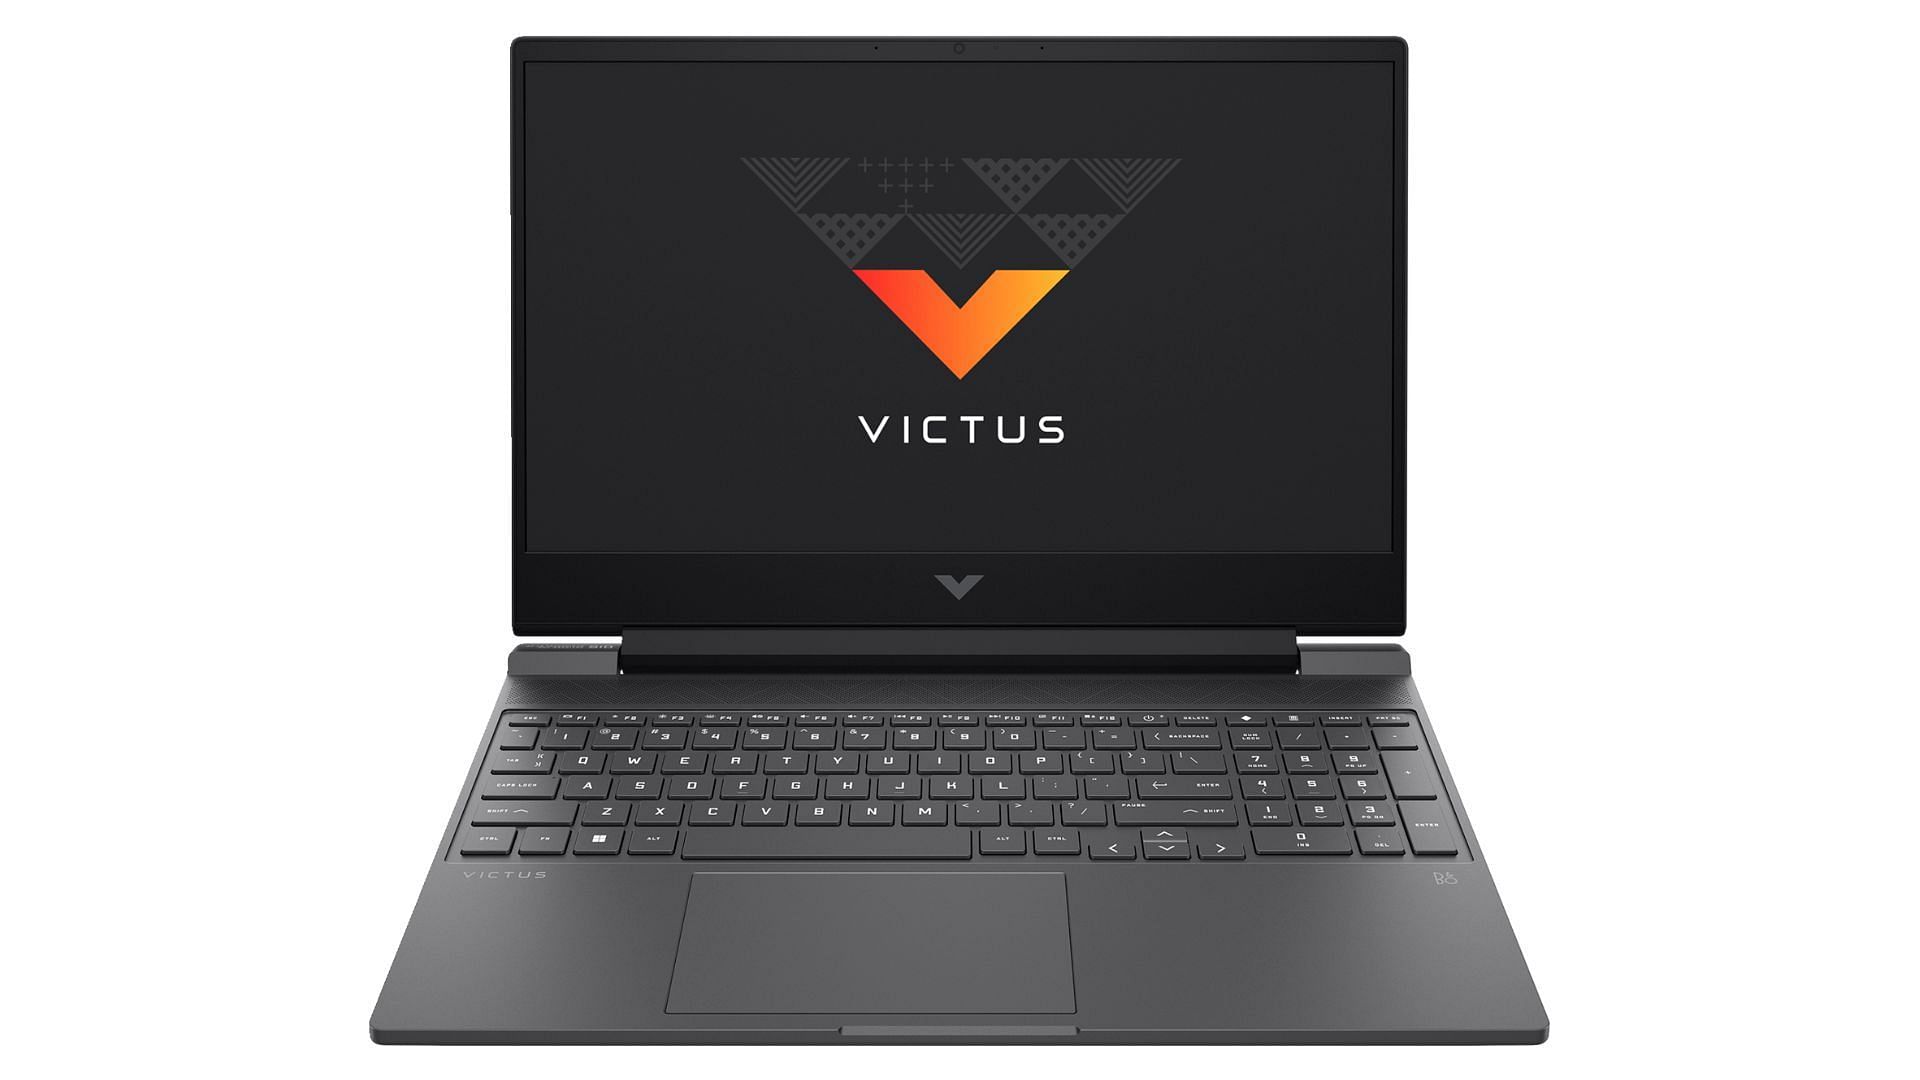 HP Victus 15 - best budget gaming laptop for F1 24 (Image via HP)